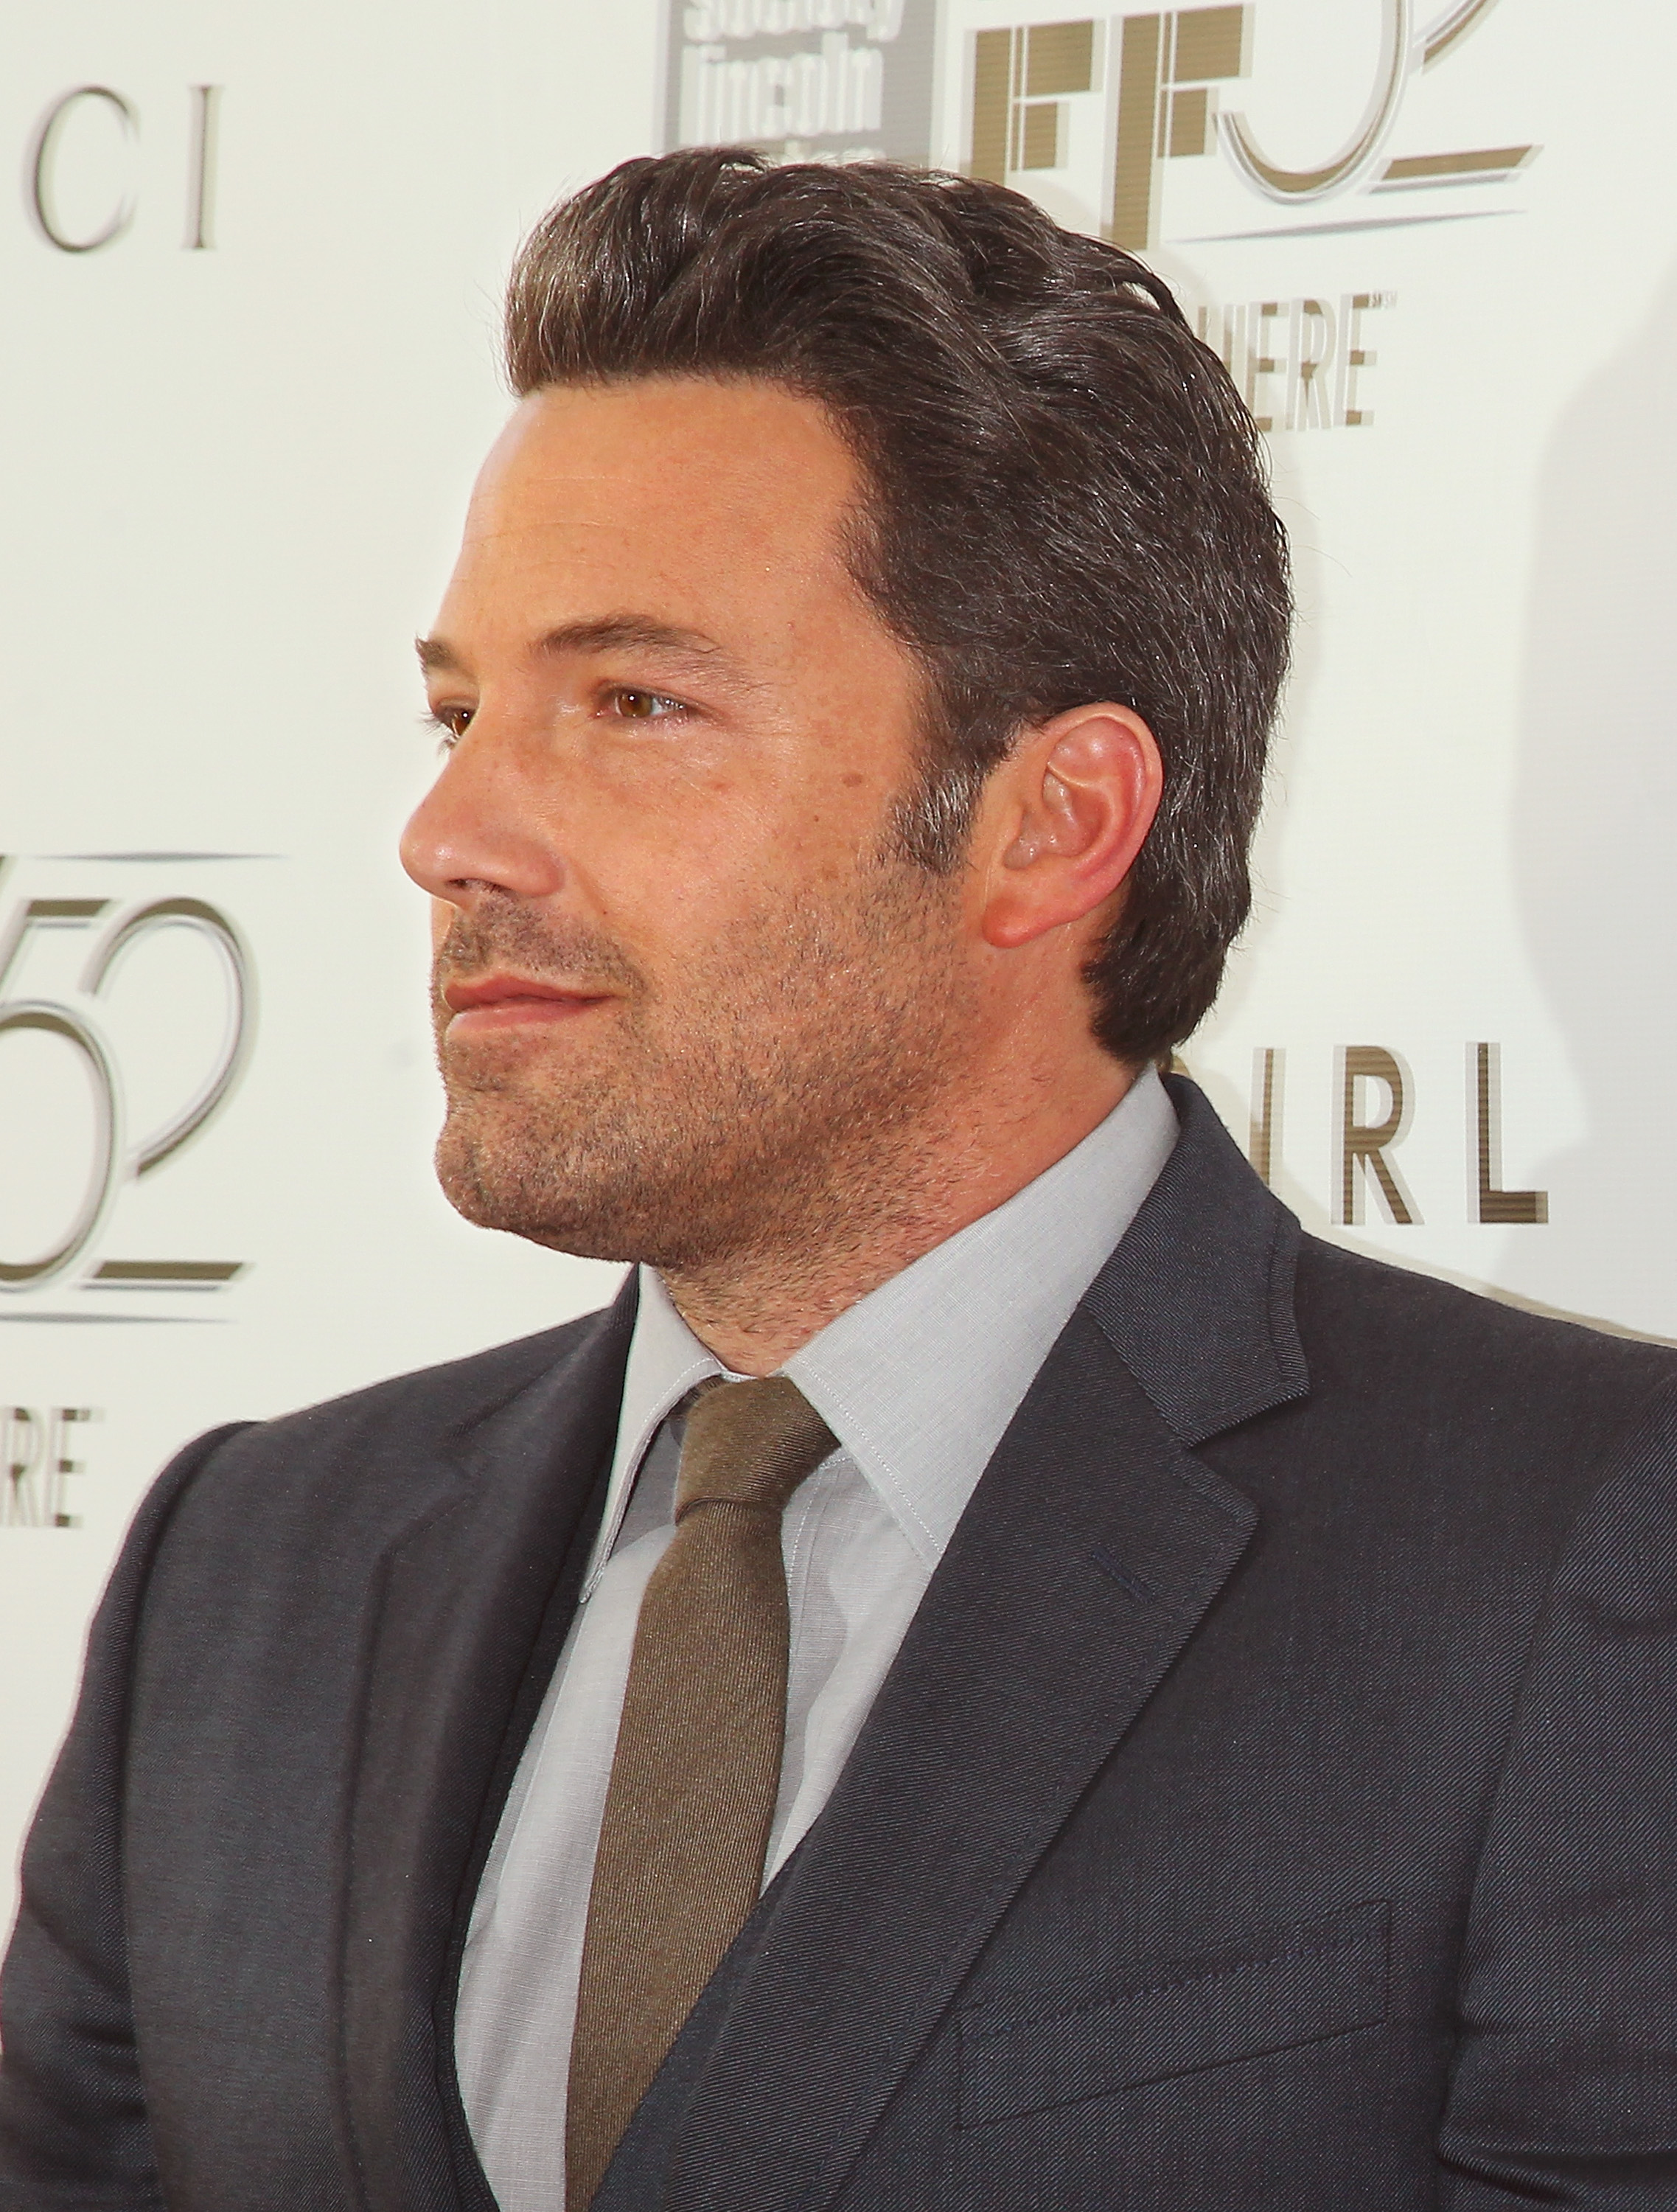 Actor/director Ben Affleck attends the 52nd New York Film Festival Opening Night Gala Presentation and World Premiere Of "Gone Girl" at Alice Tully Hall on September 26, 2014 in New York City. (Jim Spellman&mdash;WireImage)